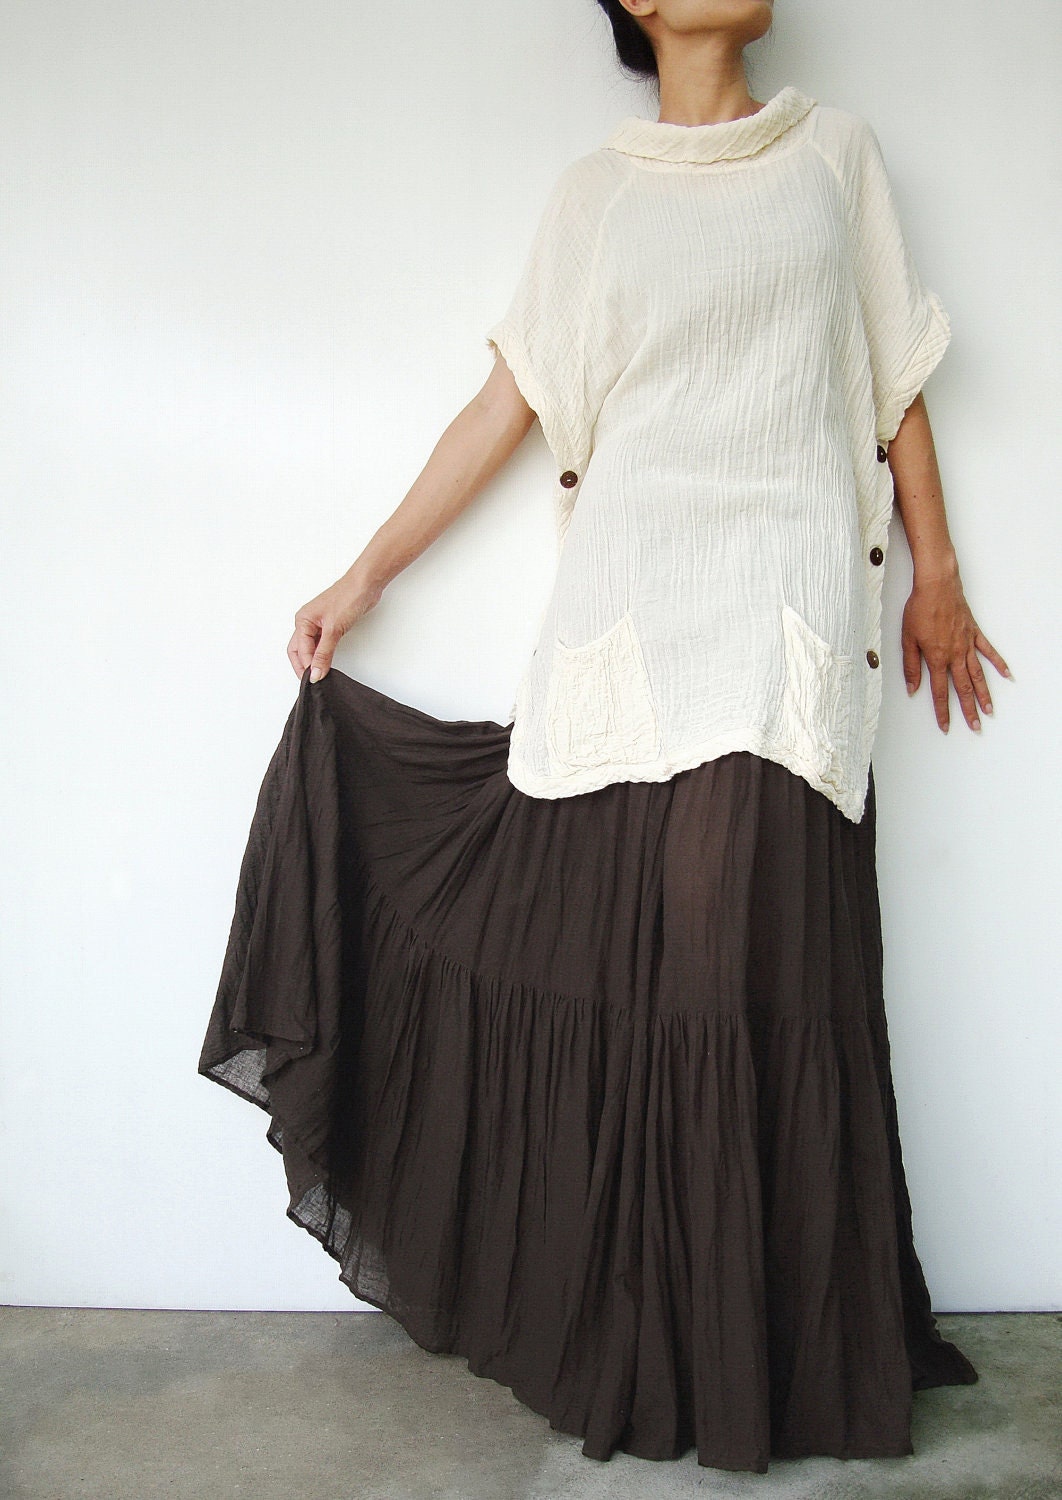 NO.5 Brown Cotton Hippie Gypsy Boho Tiered Long Peasant Skirt